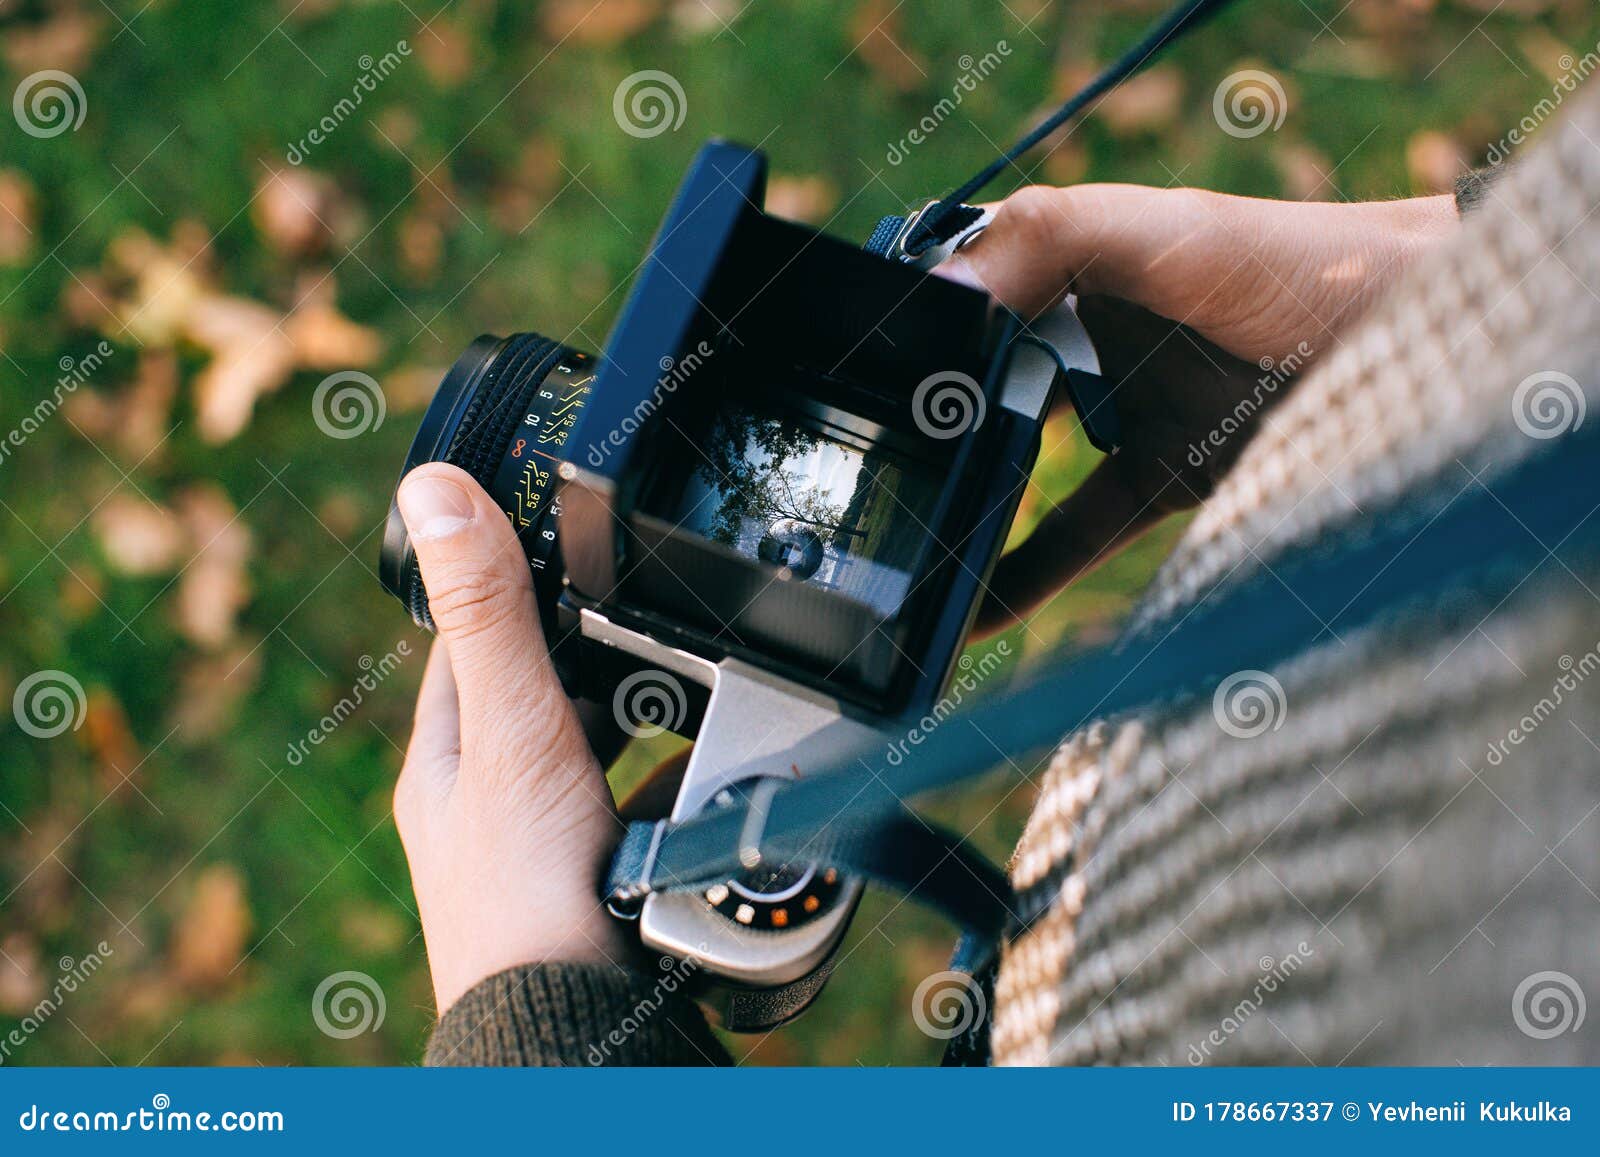 Man Photographer Is Making Landscape Photography With Old Film Camera Stock Image Image Of Making Hand 178667337